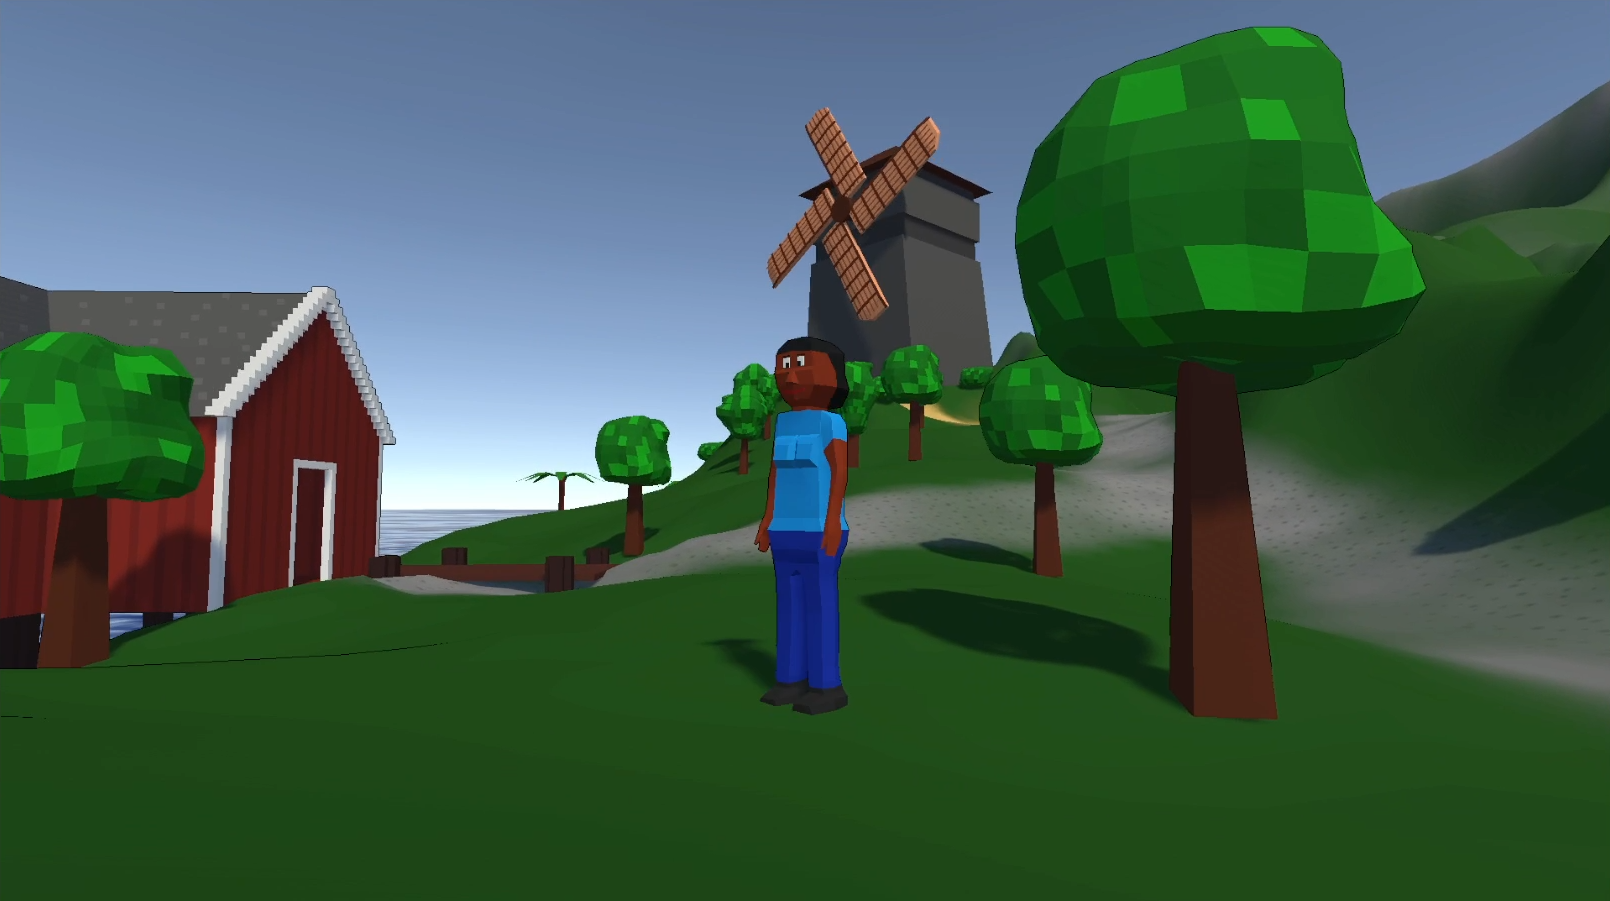 Screenshot: Player standing next to a fisher-house, wind-mill in the background